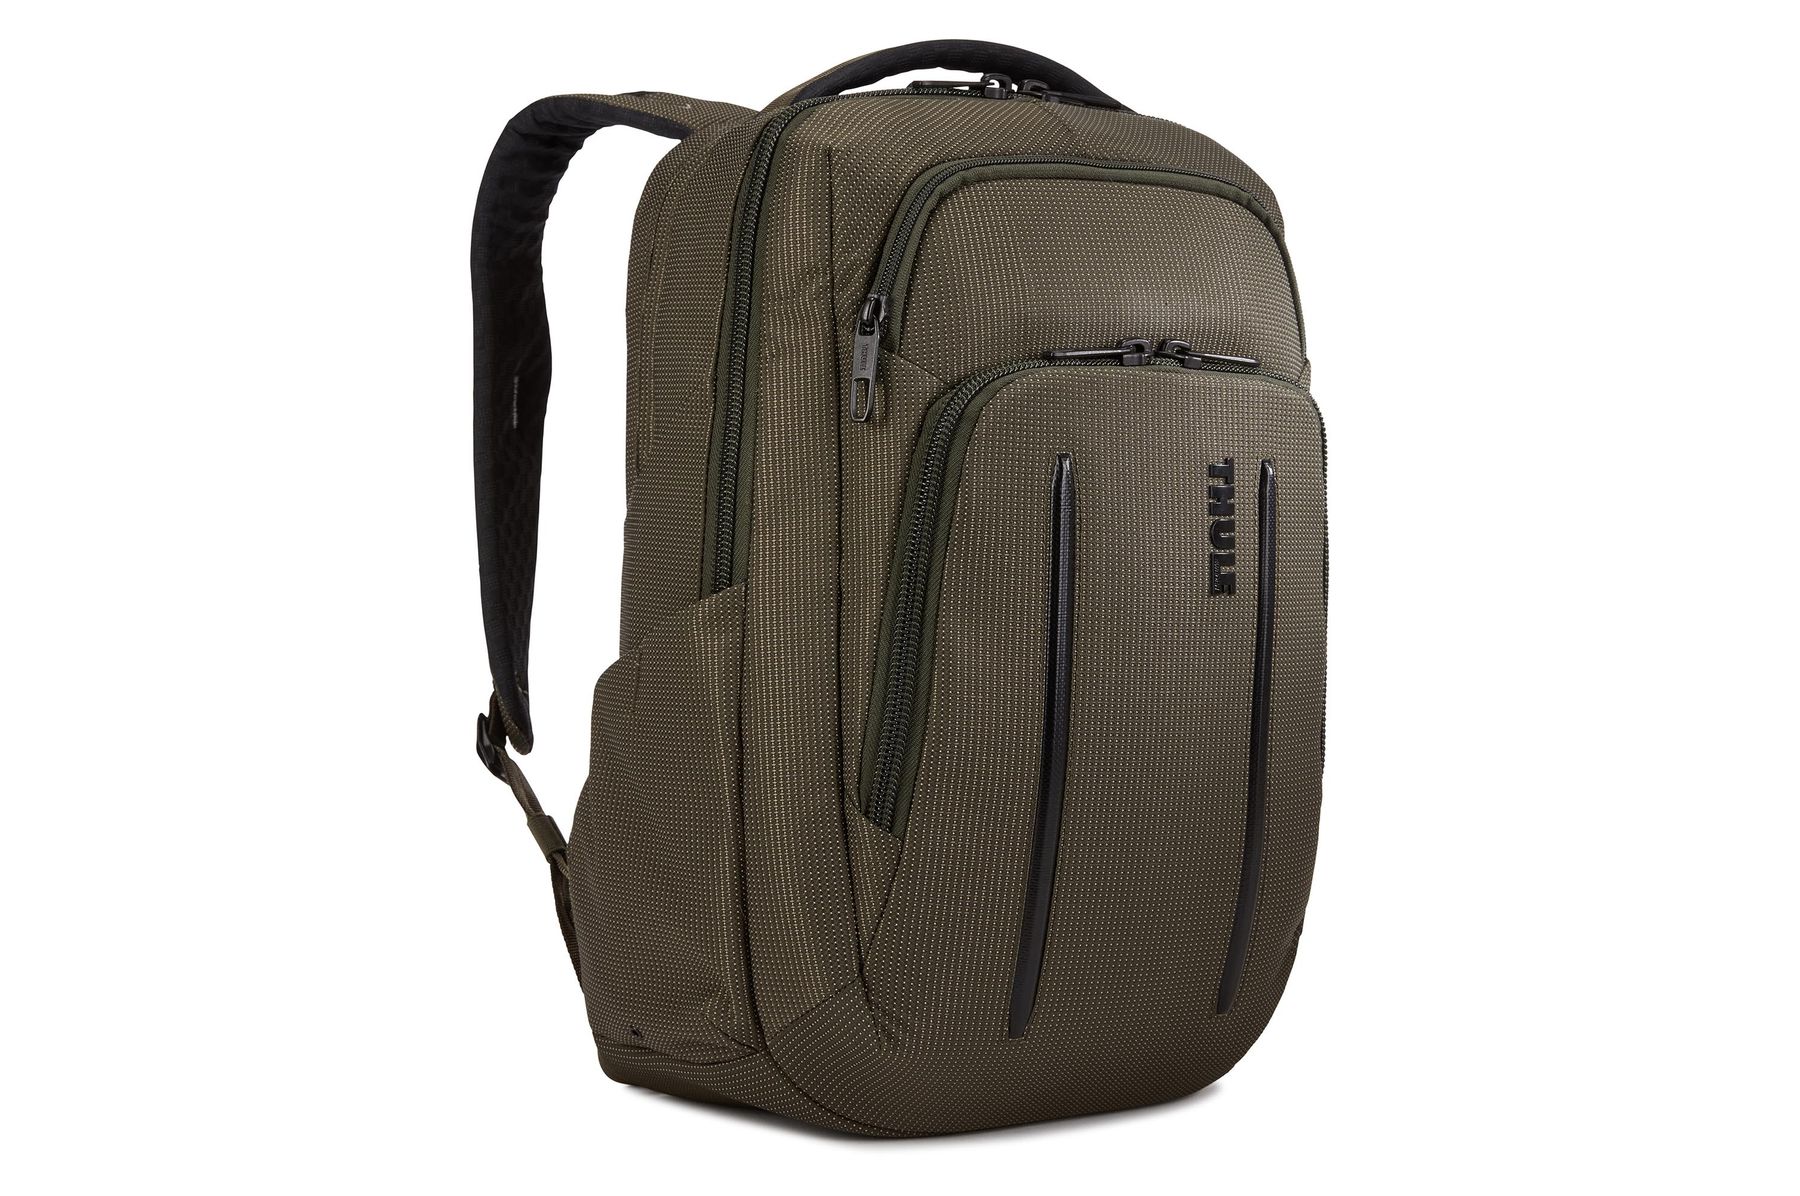 Thule Crossover 2 Backpack 20L Forest Night